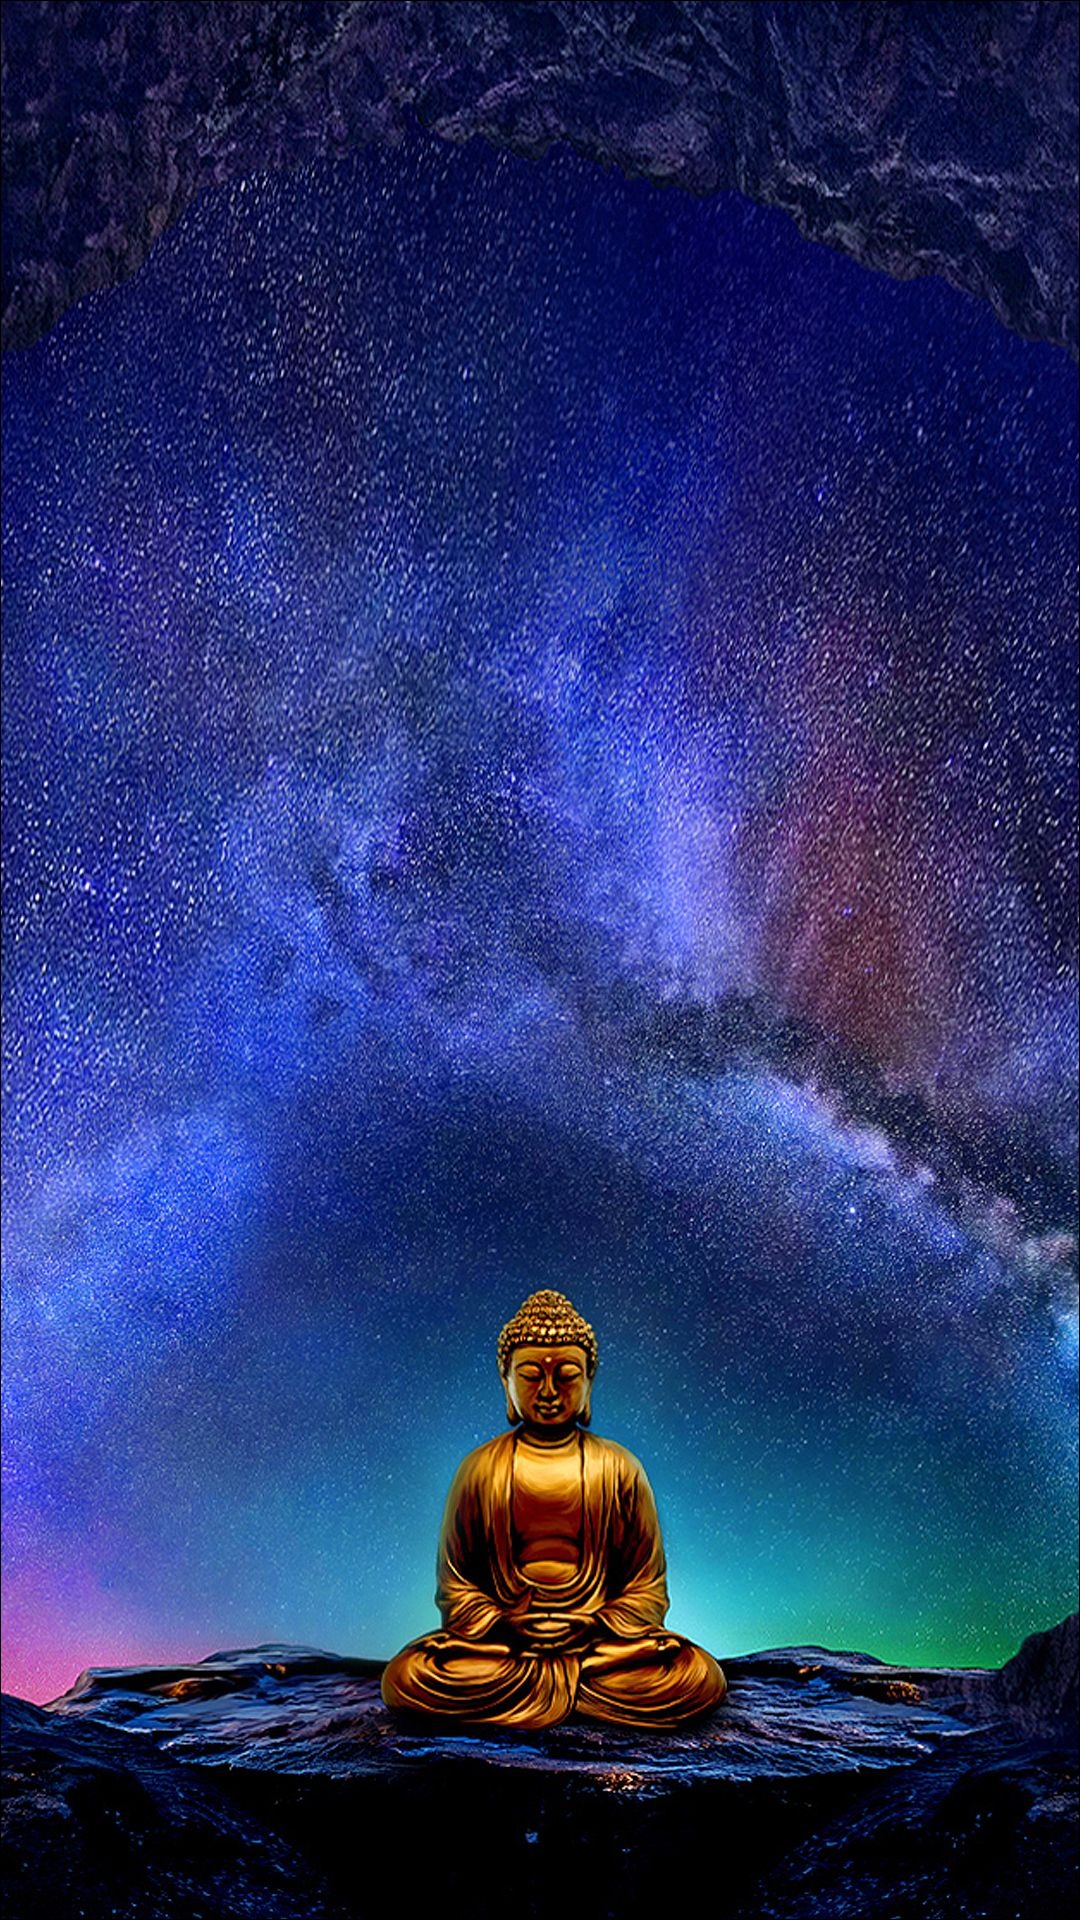 Buddha Wallpaper For Mobile Devices Artwork By Goodvibesgallery - Buddha Wallpaper Iphone 7 Plus , HD Wallpaper & Backgrounds